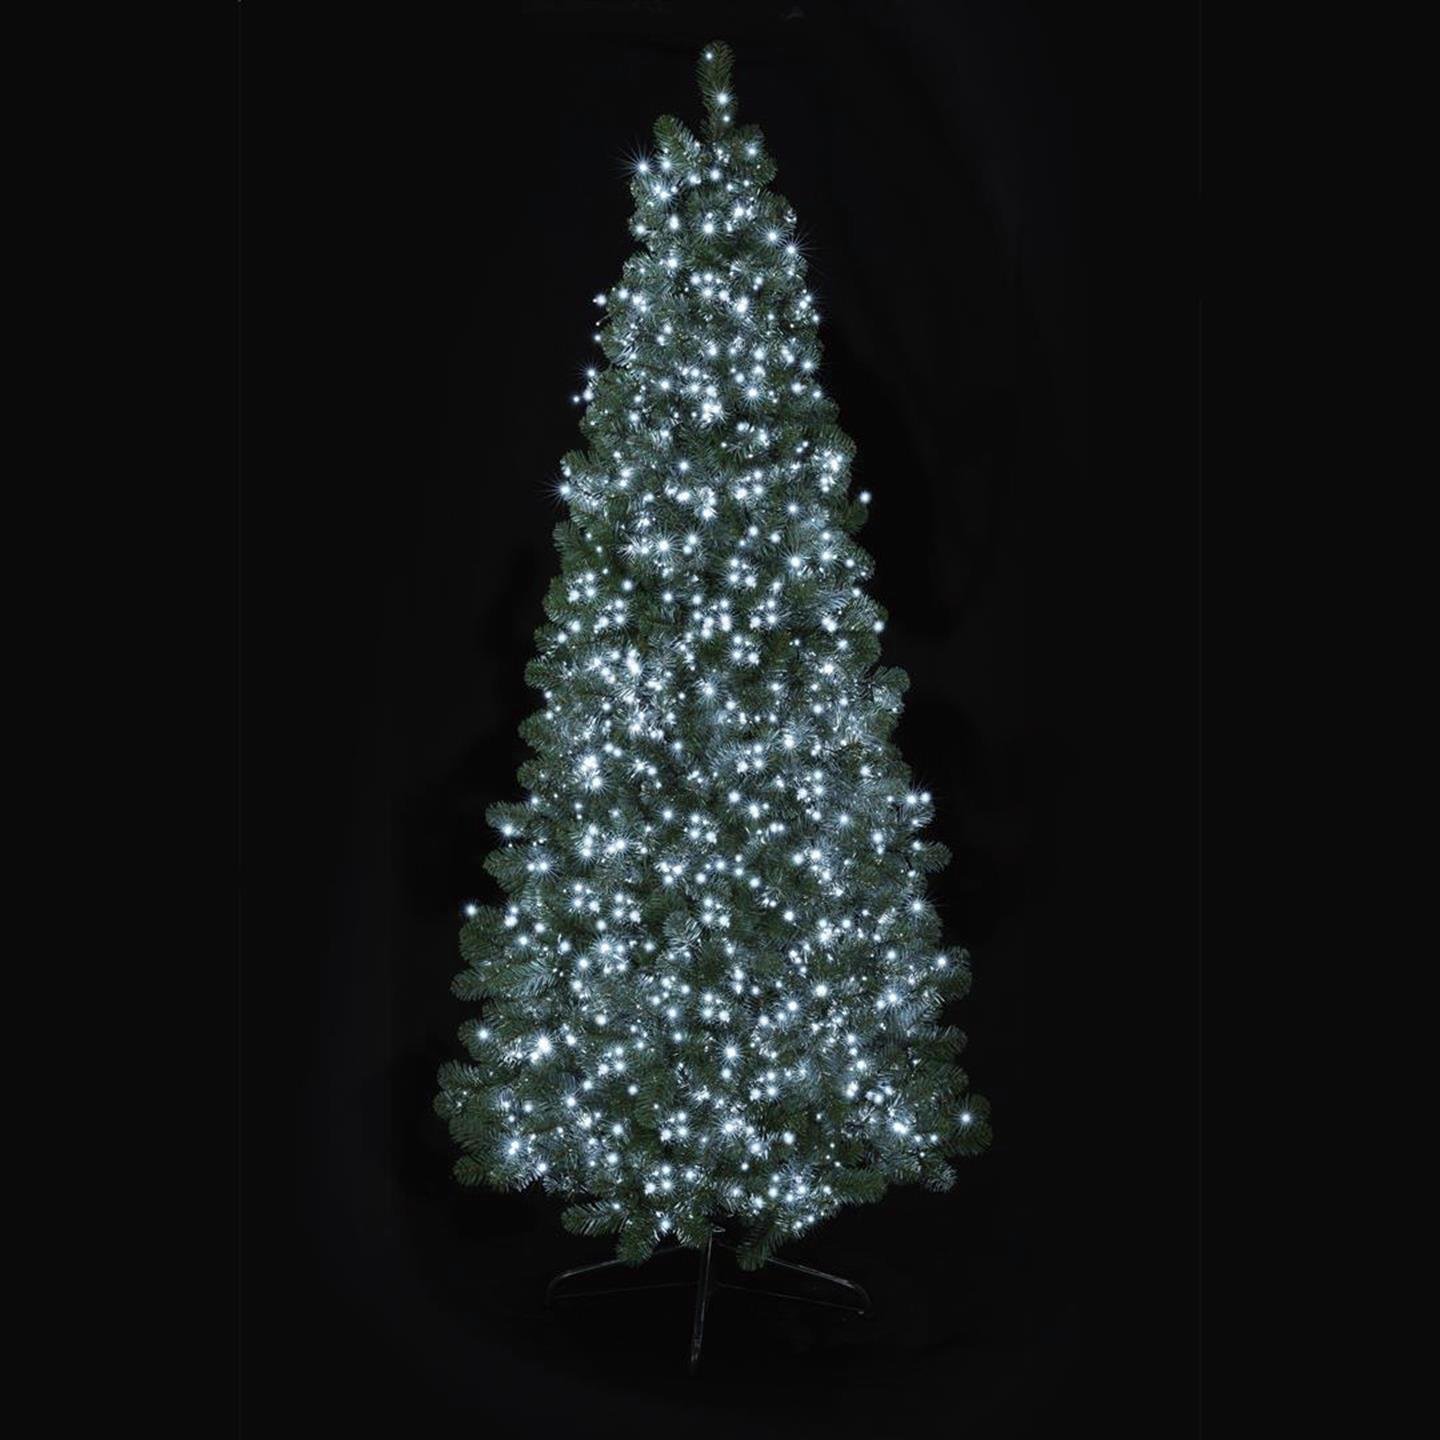 Premier Decorations 1500 TreeBrights with Timer - White